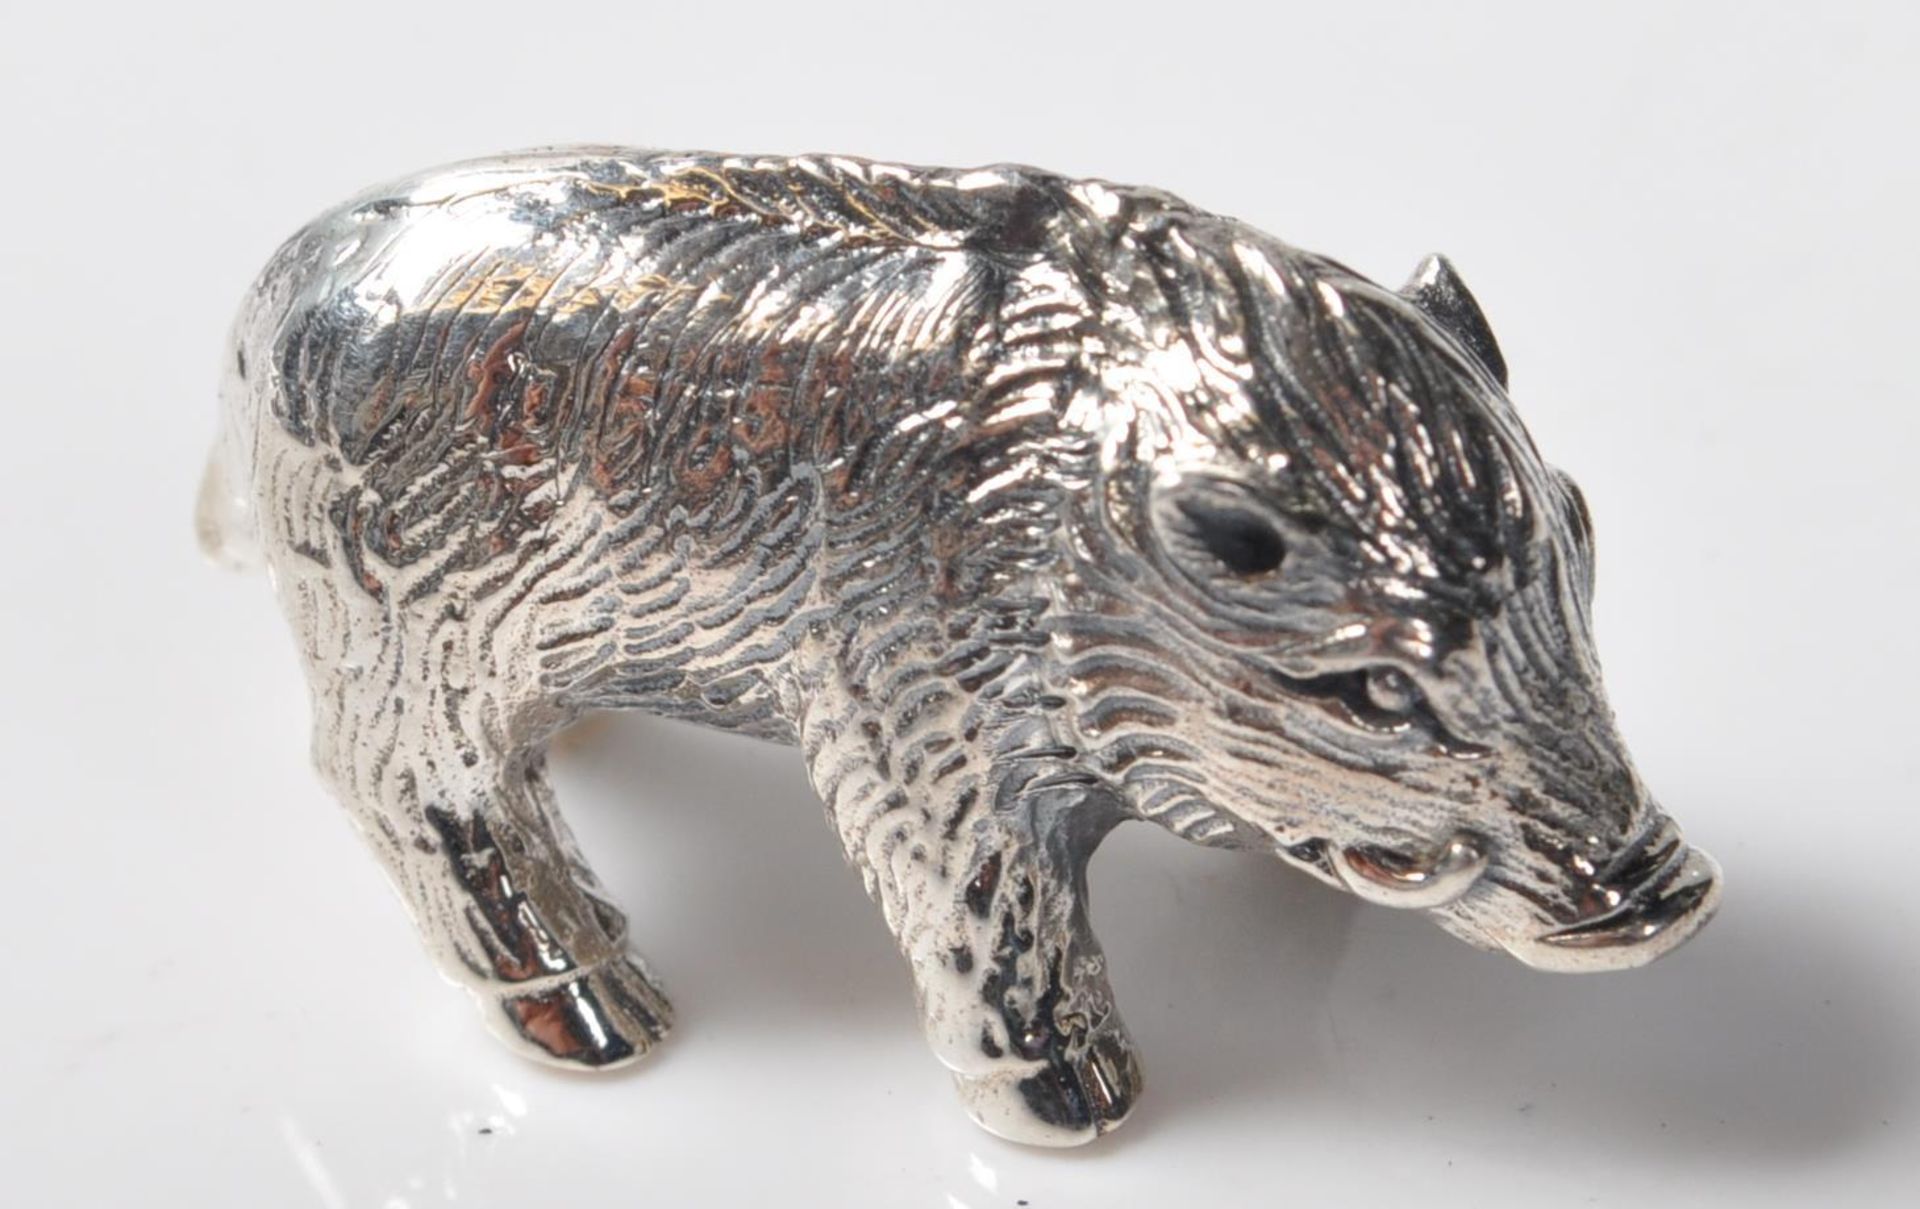 STAMPED STERLING SILVER MINIATURE TRUFFLE PIG